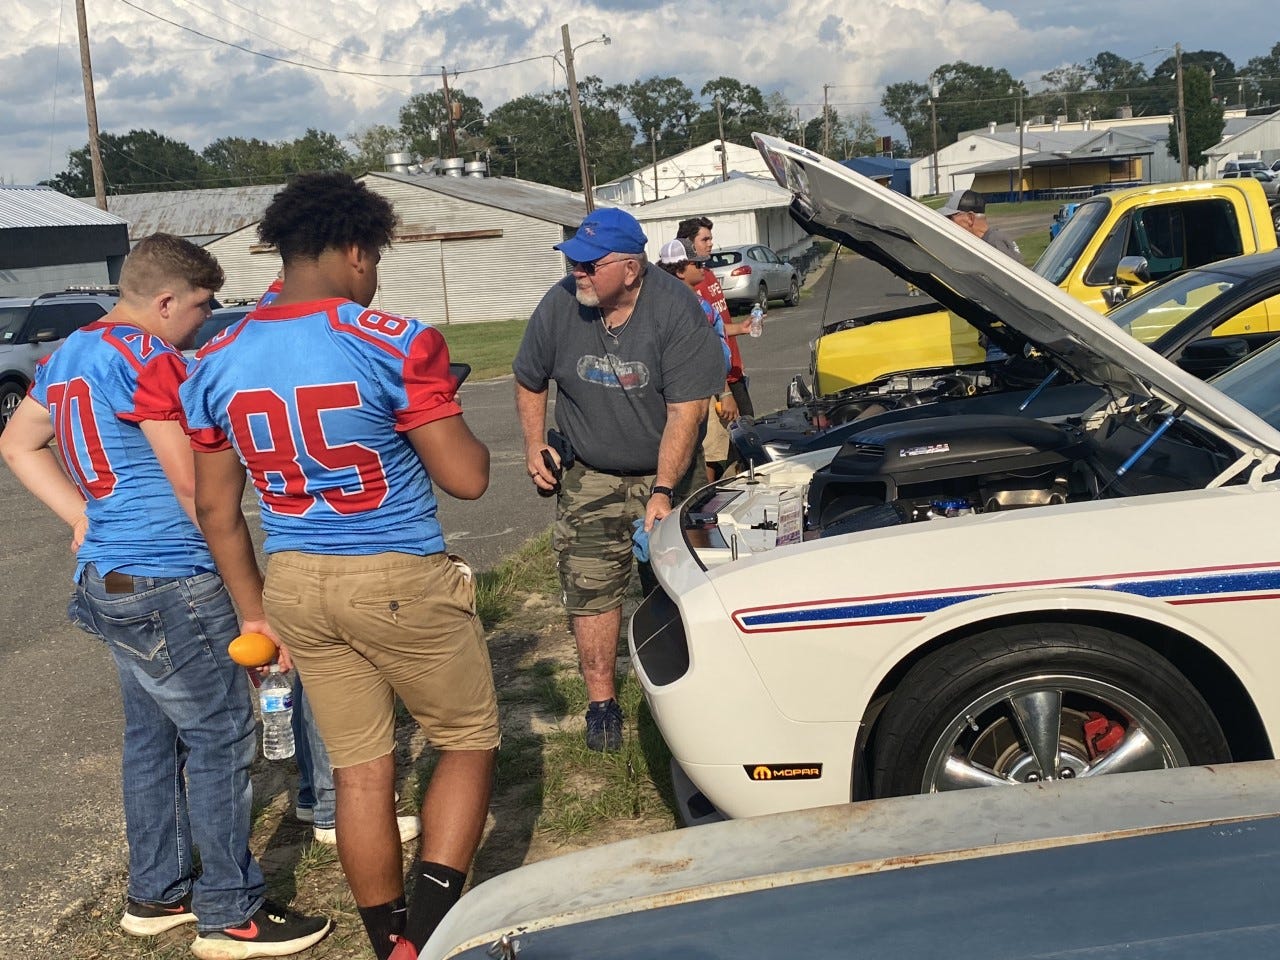 A classic car show was just one of the many things going on at National Night Out 2021.